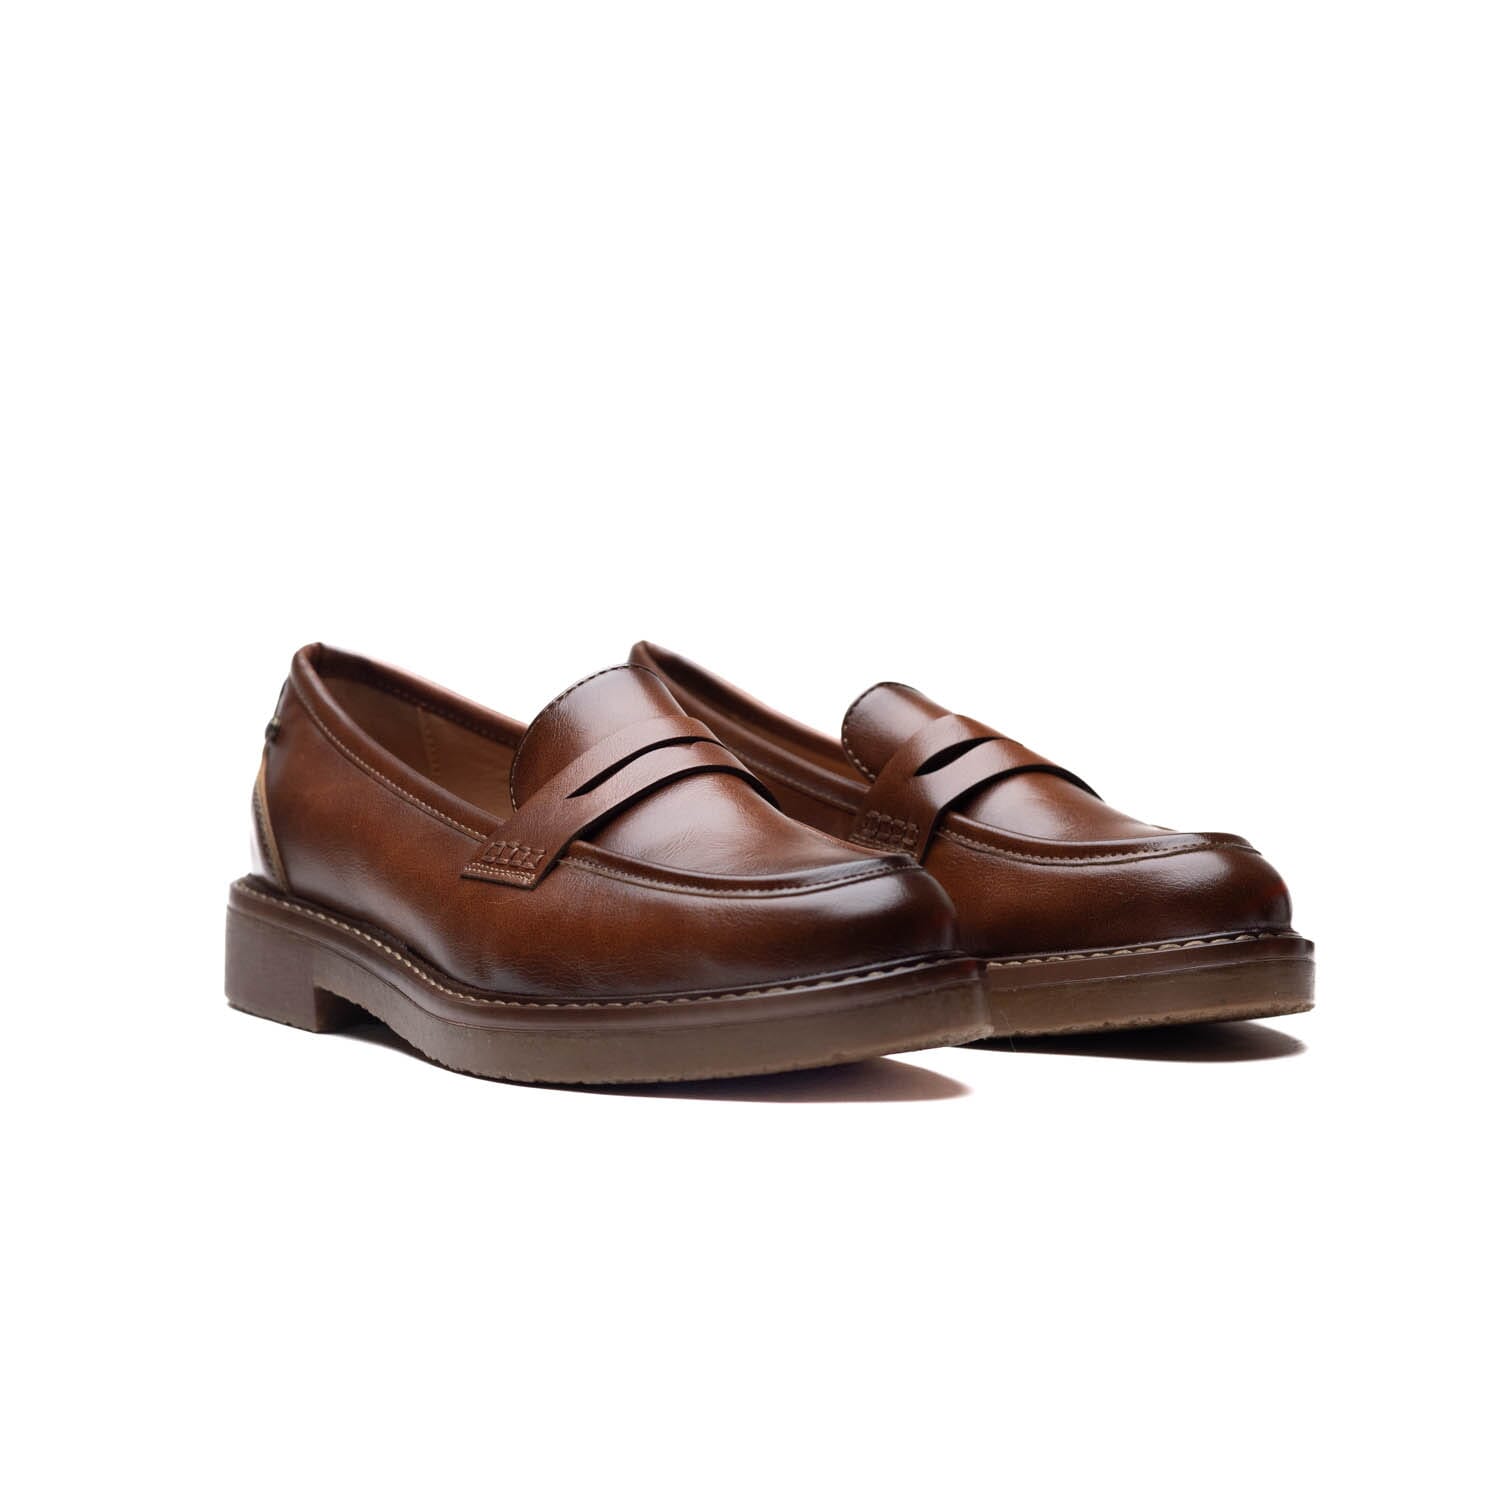 Pierre Cardin -10261 -Brown – Perocili Shoes